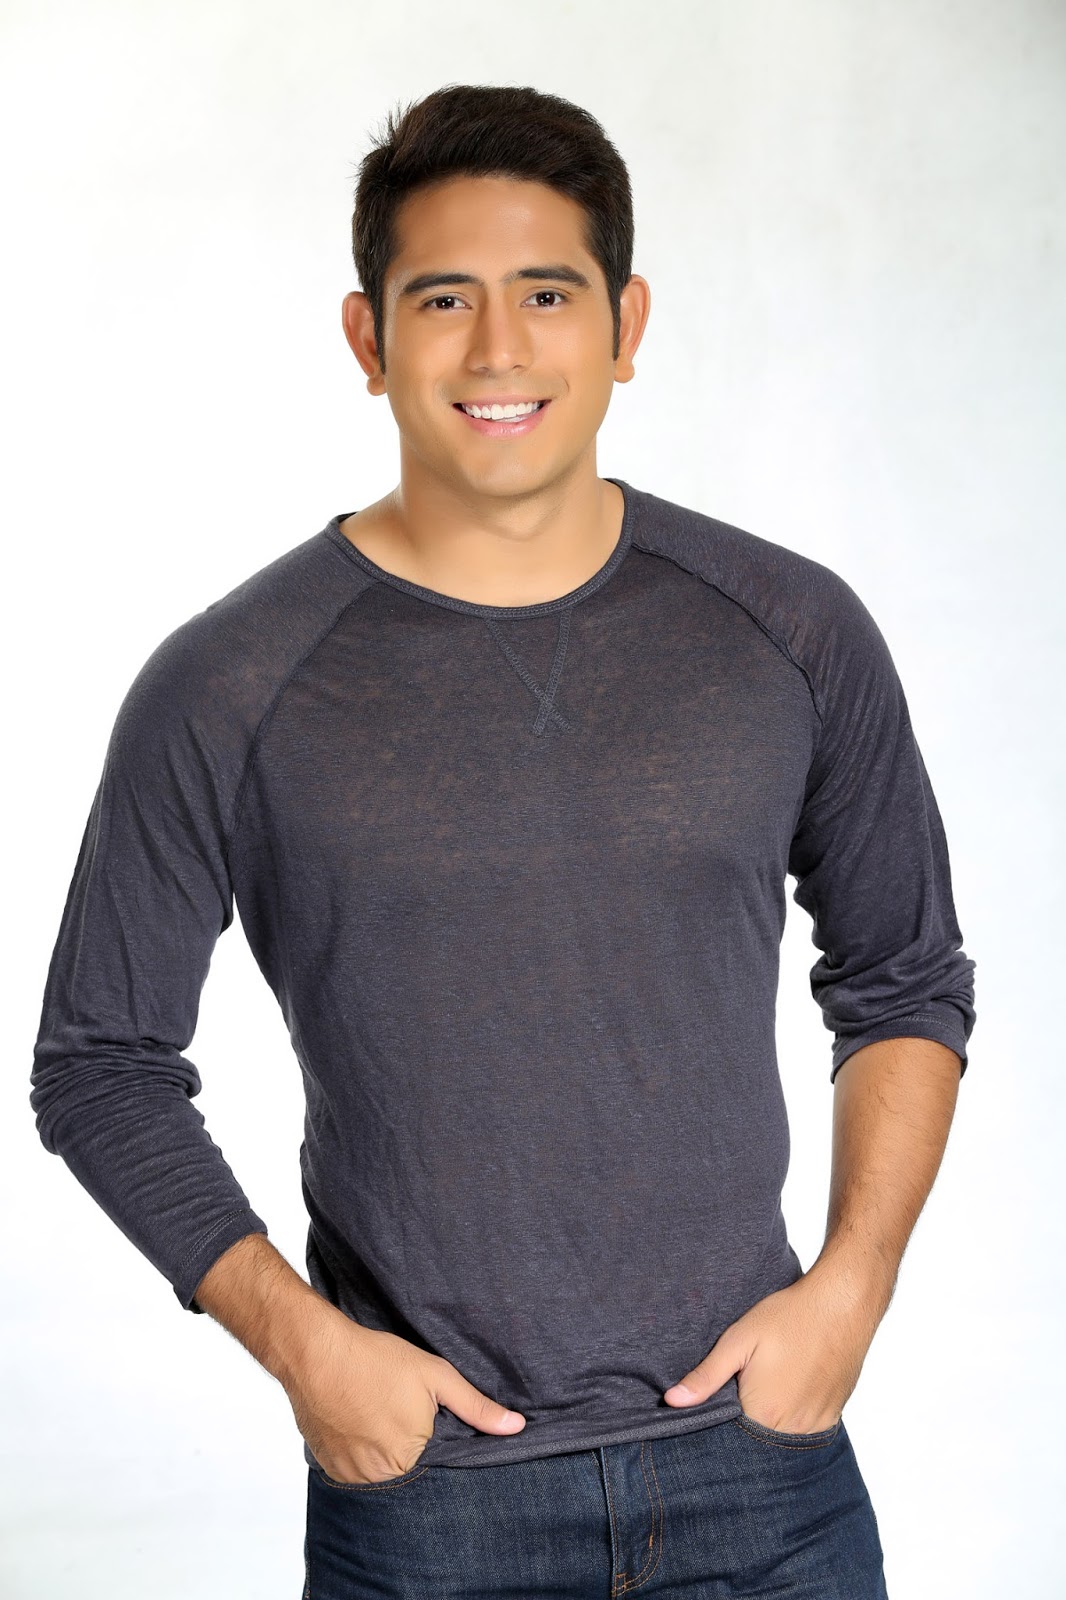 At 30, Gerald Anderson now ready for marriage | Inquirer 